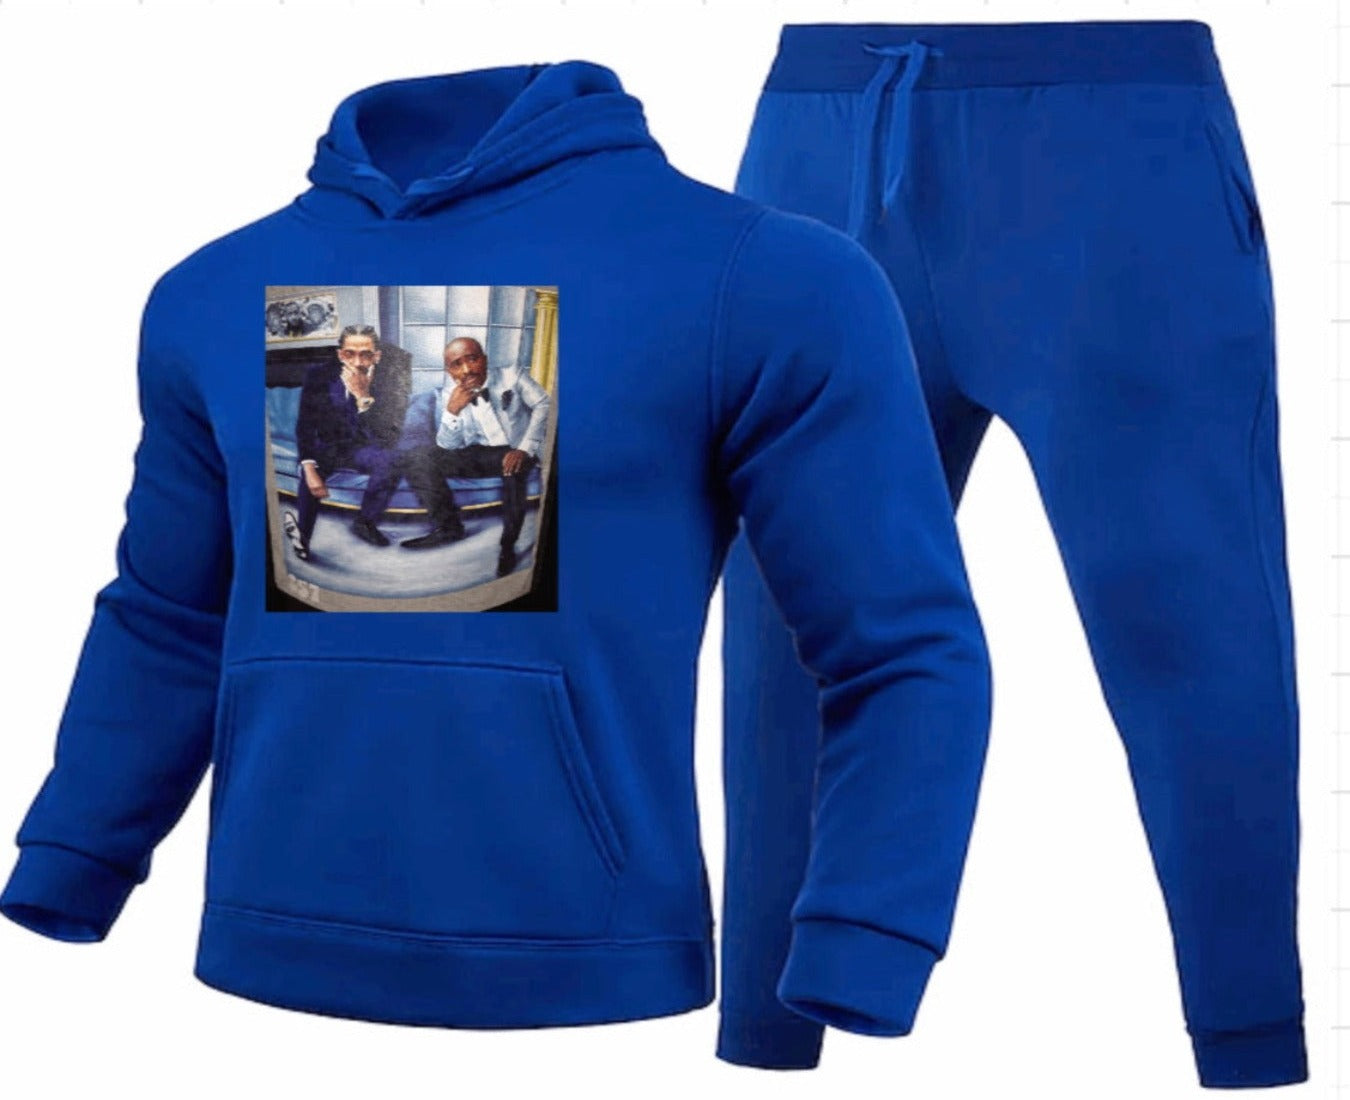 Homage to Greatness sweatsuit